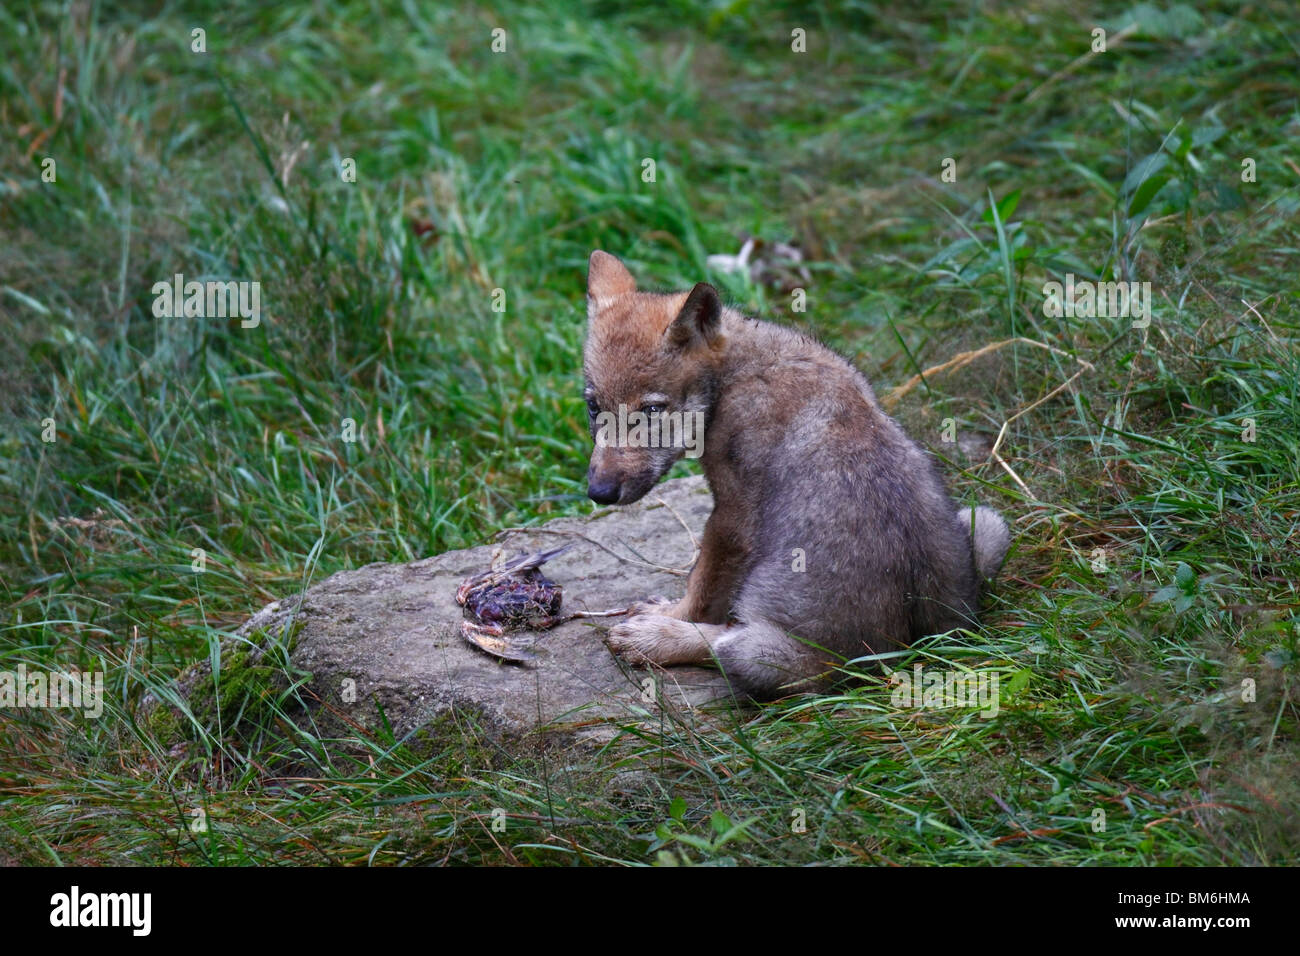 Wolf, Canis, lupus, jung,welpe, jungtier Stock Photo